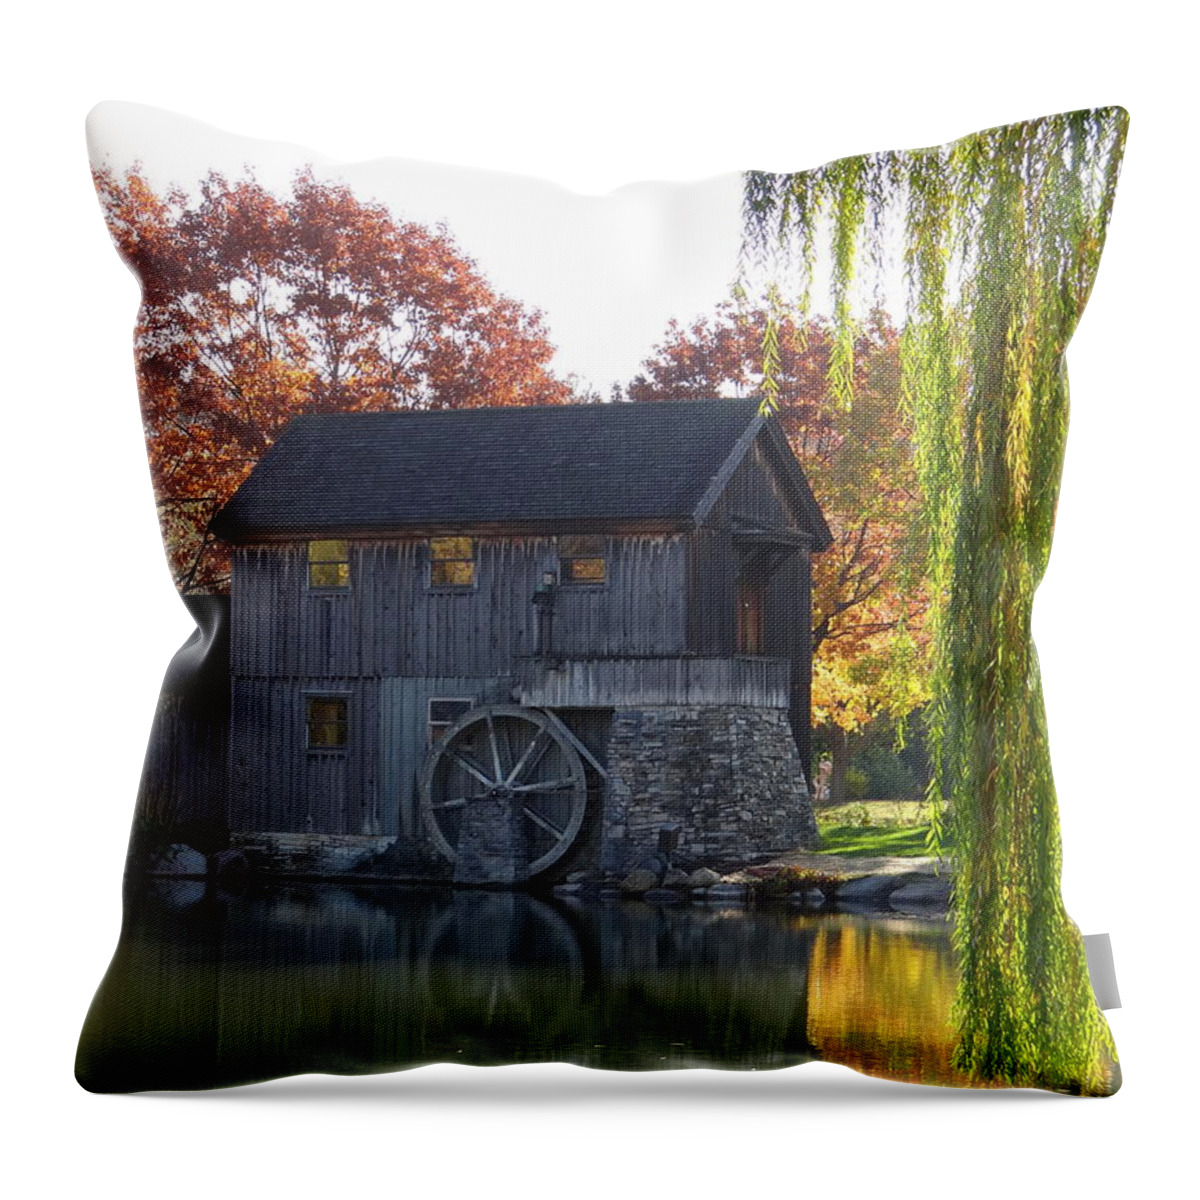 Millhouse Throw Pillow featuring the photograph The Millhouse by Julia Wilcox